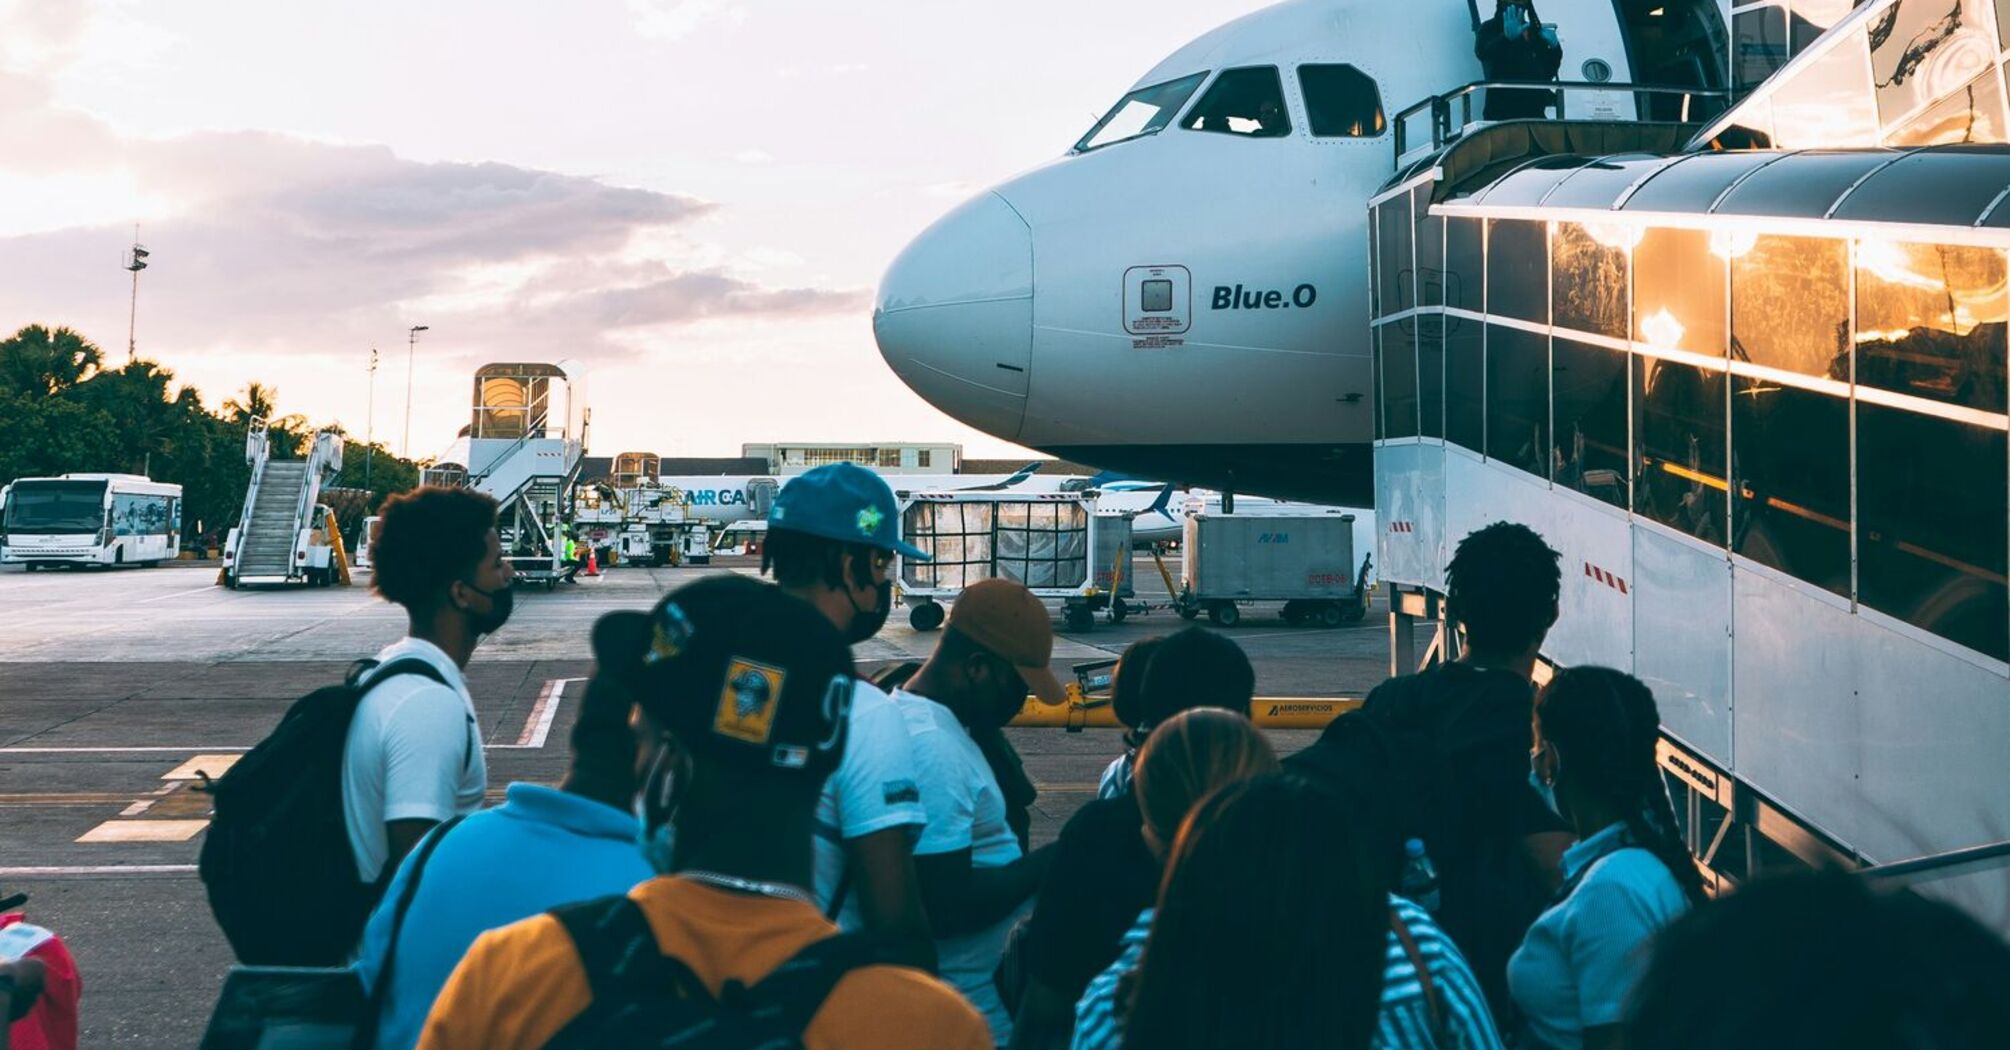 Passengers boarding a JetBlue aircraft at the airport